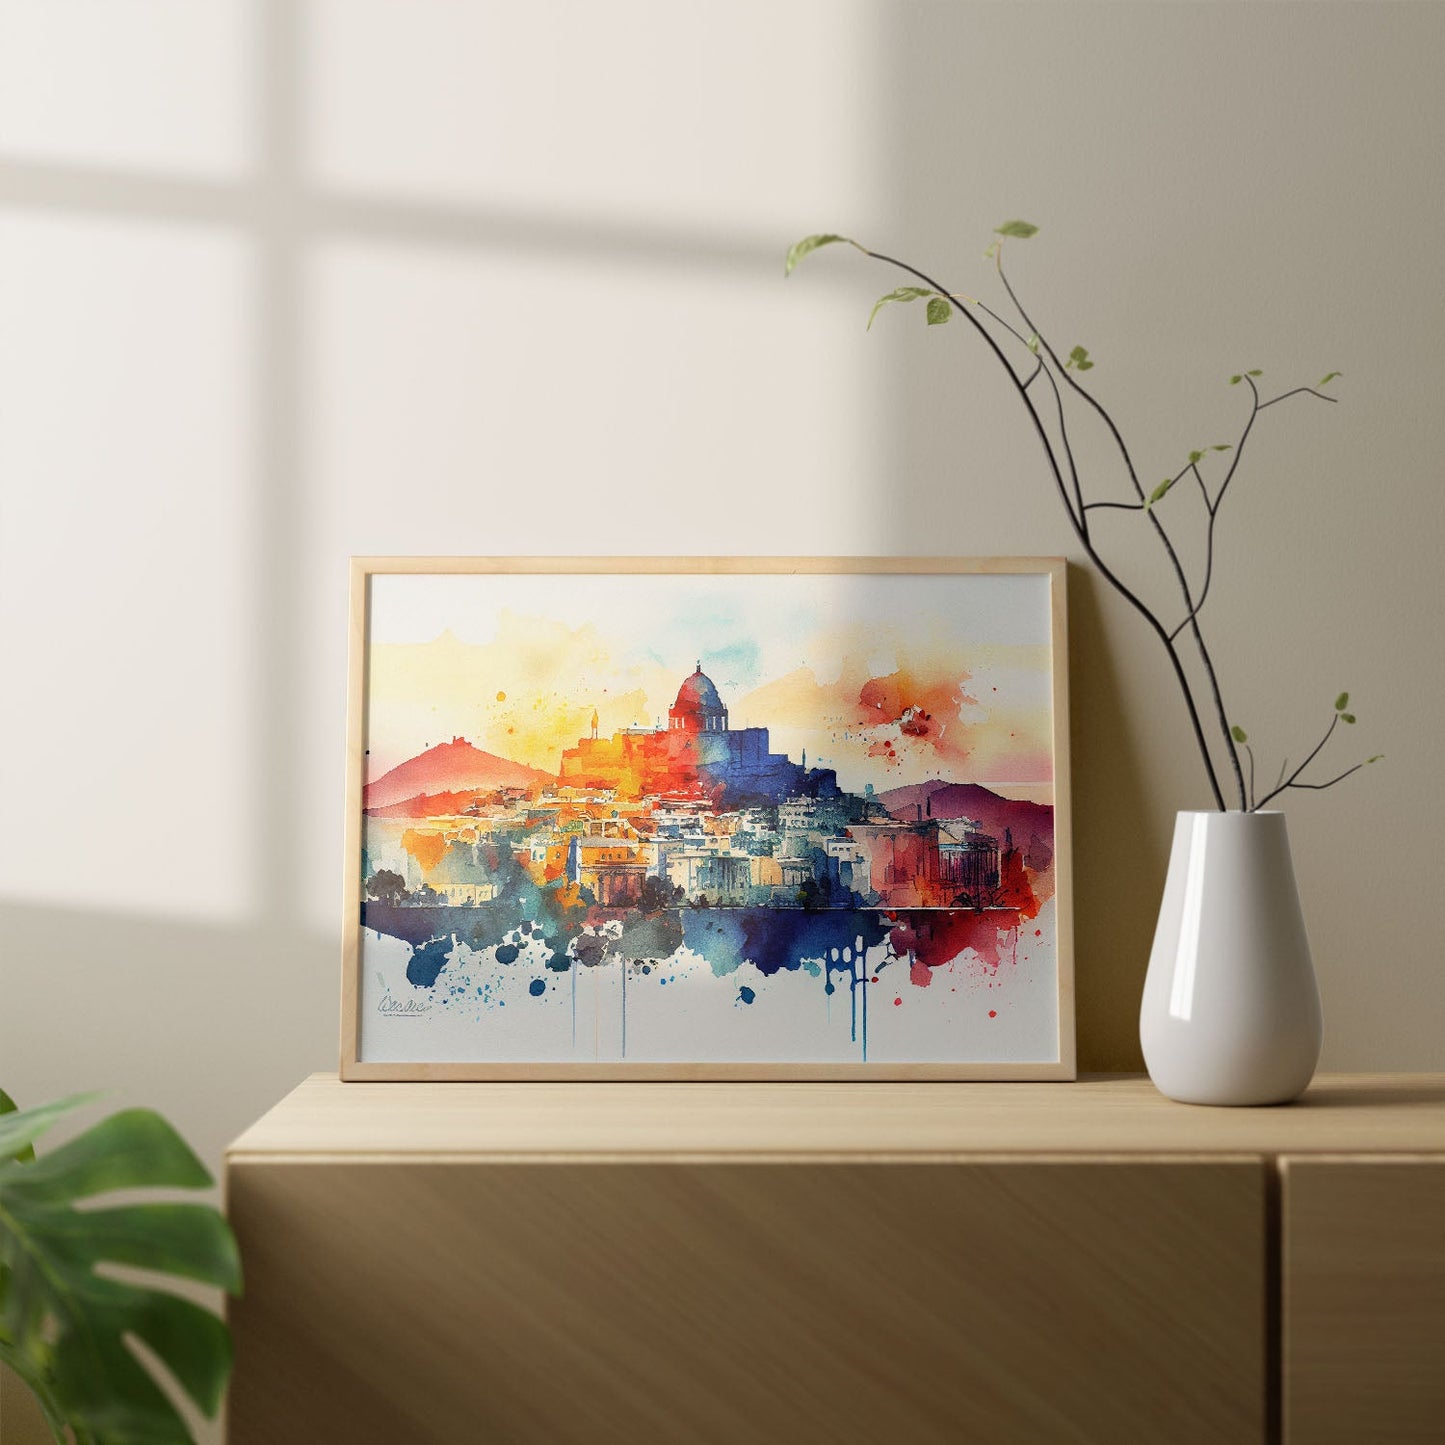 Nacnic watercolor of a skyline of the city of Athens. Aesthetic Wall Art Prints for Bedroom or Living Room Design.